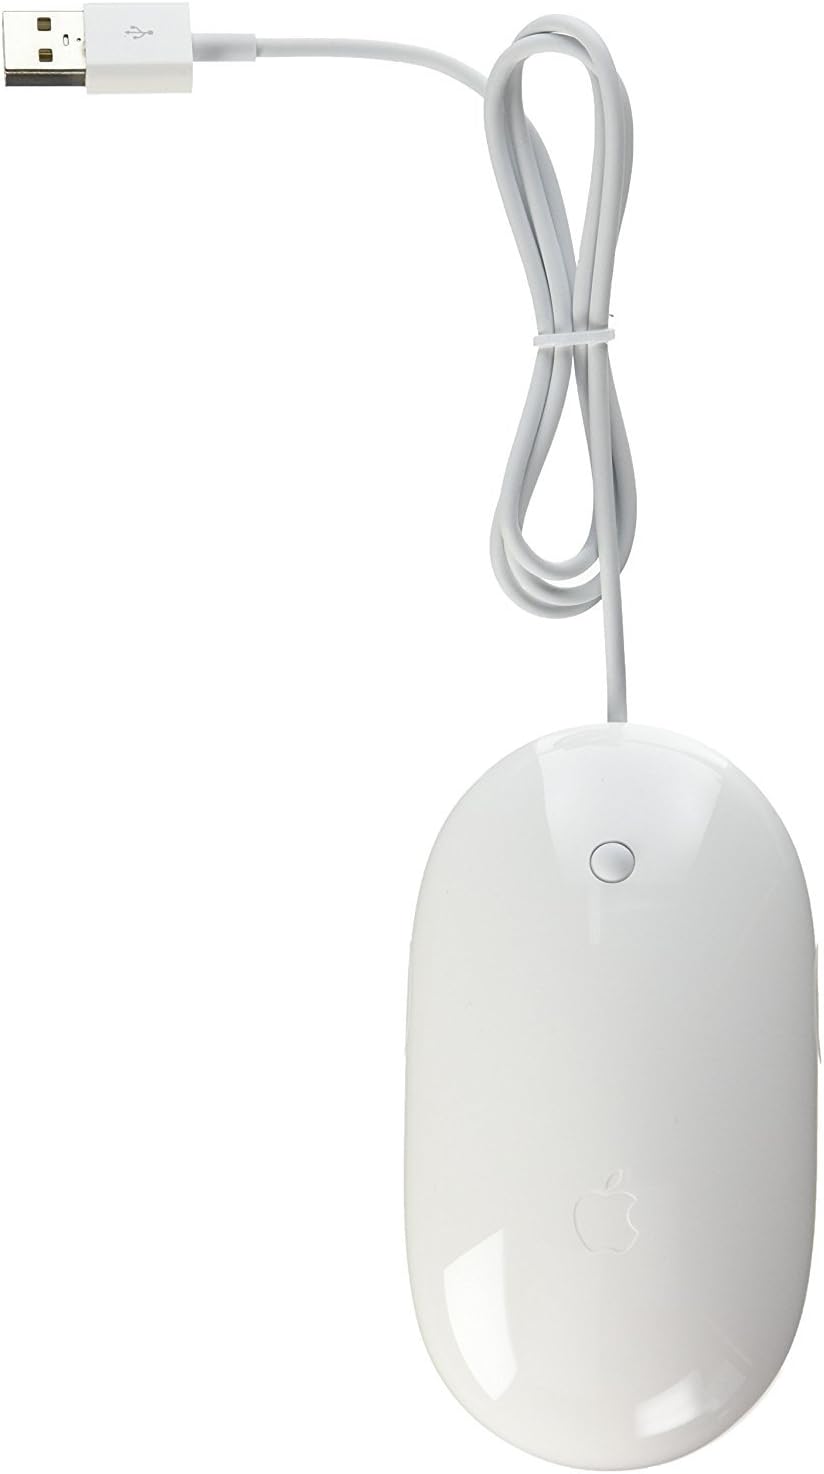 Apple Mighty Mouse A1152 Wired USB